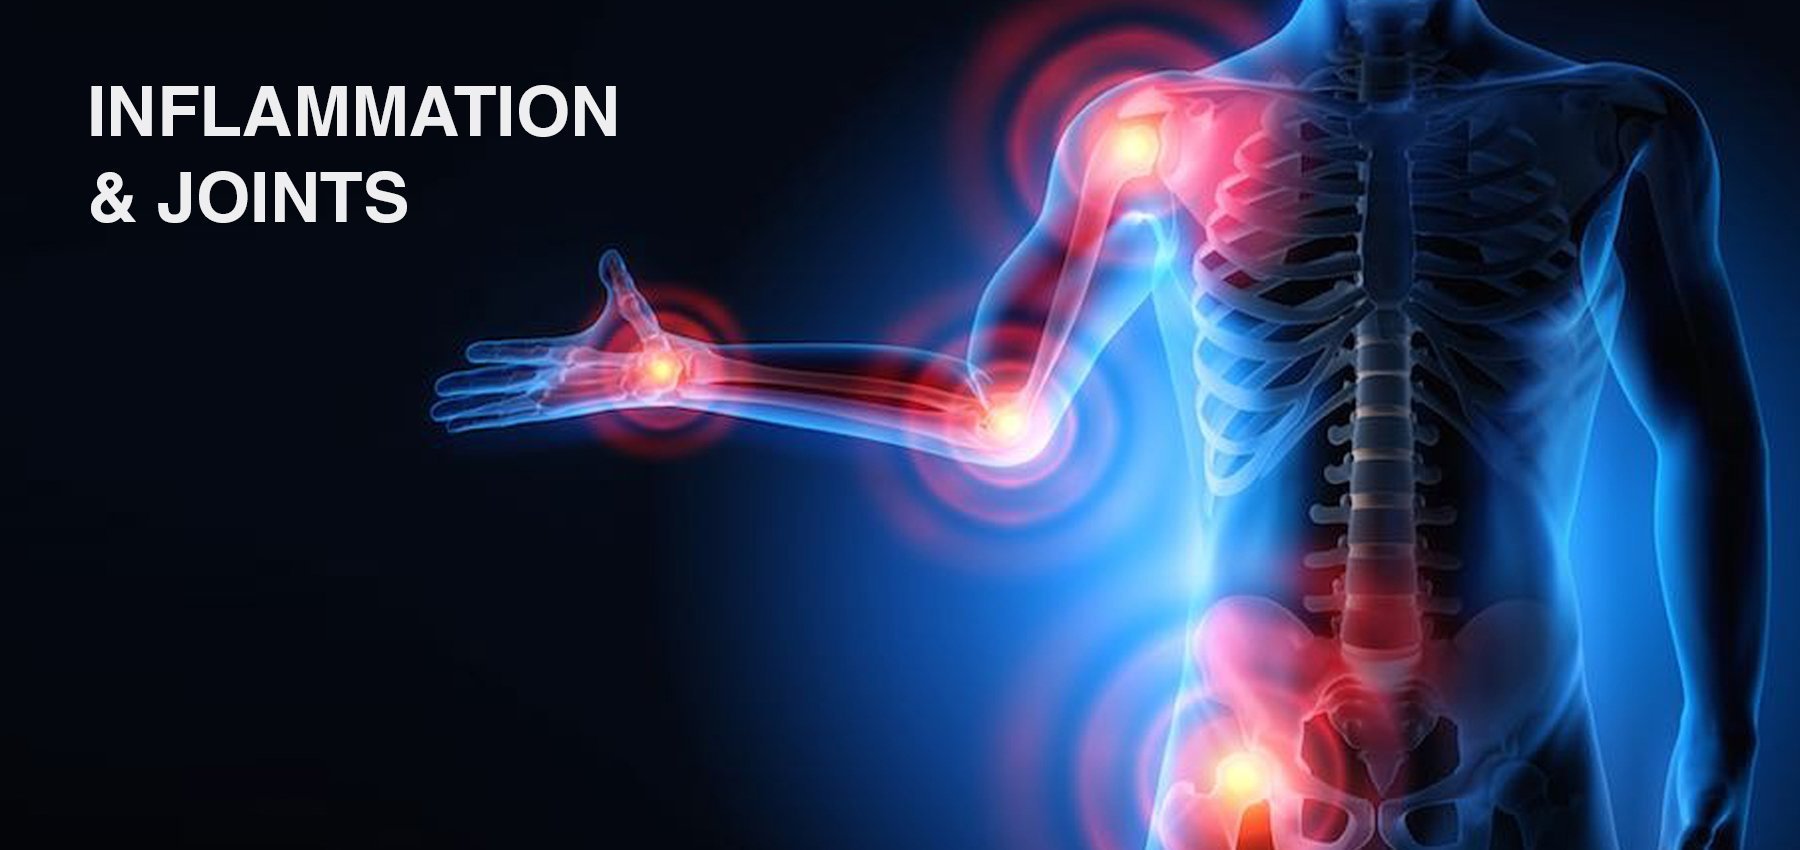 Inflammation & Joints